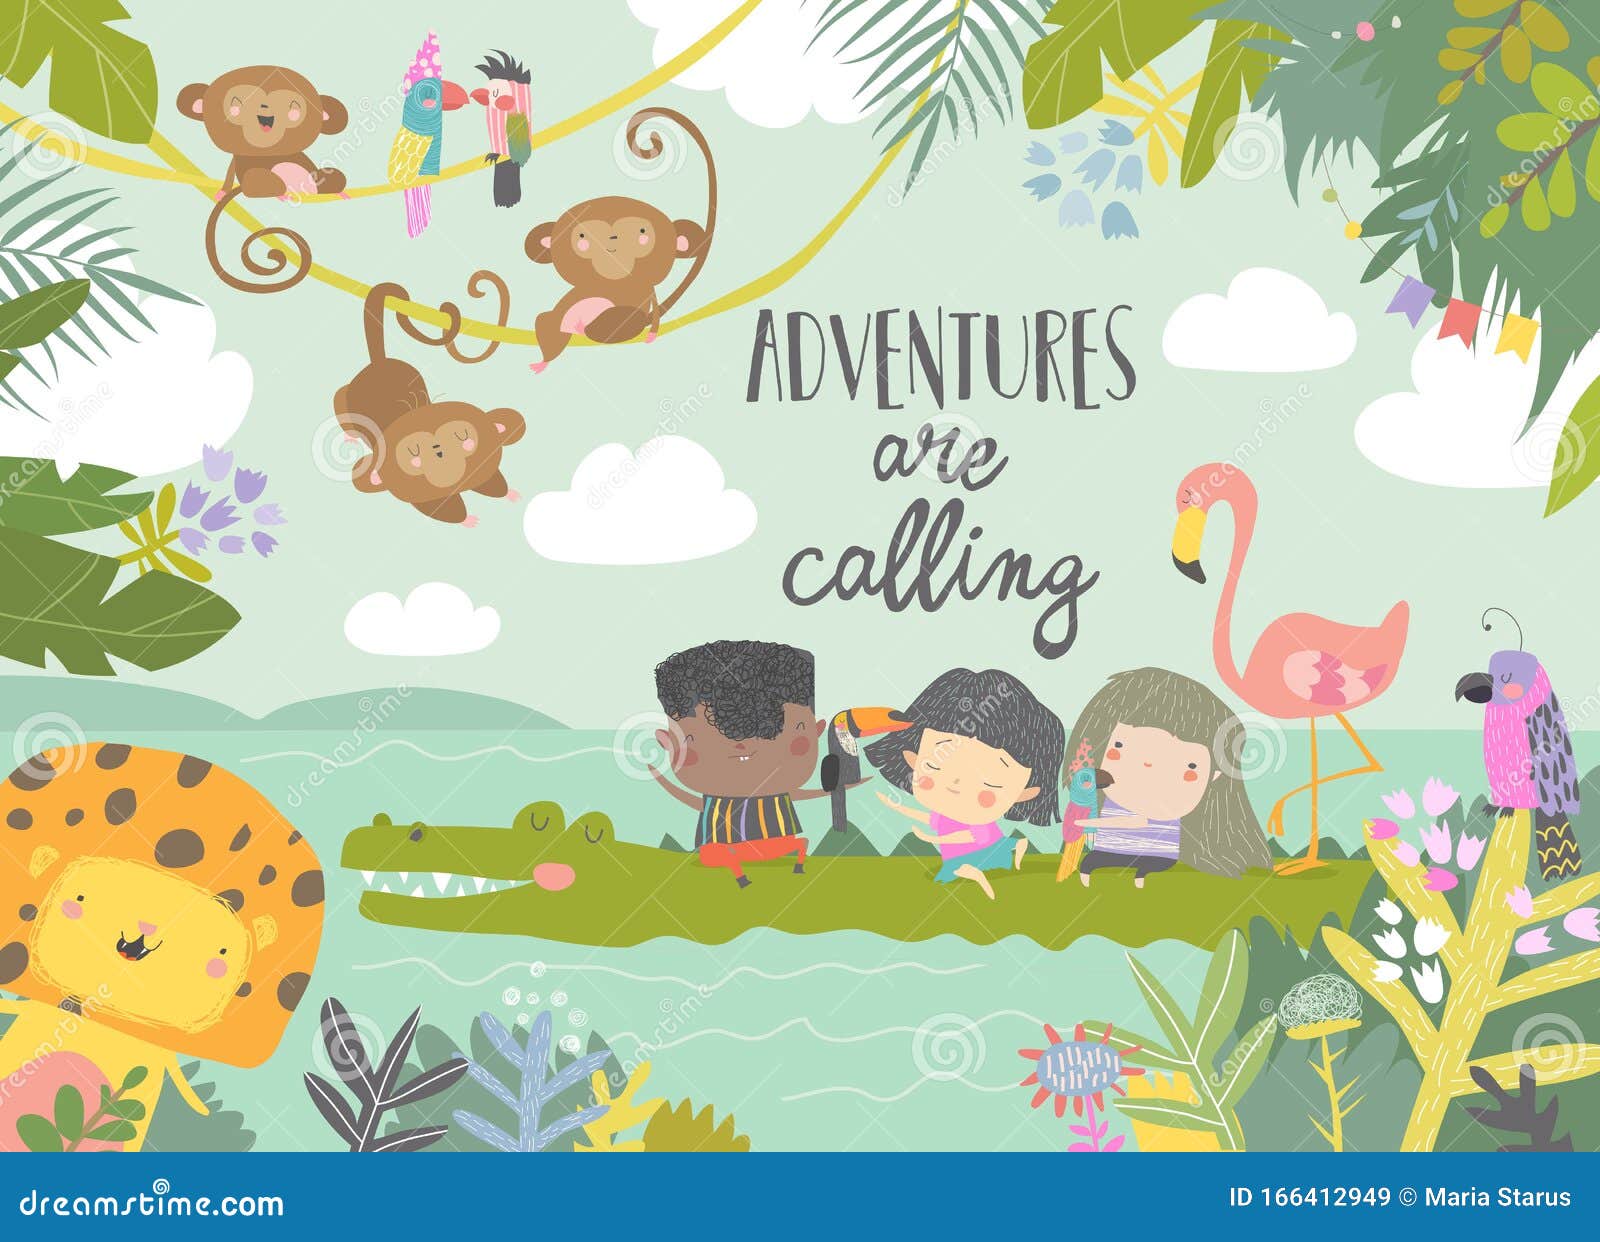 cute cartoon kids travelling with animals. adventures are calling